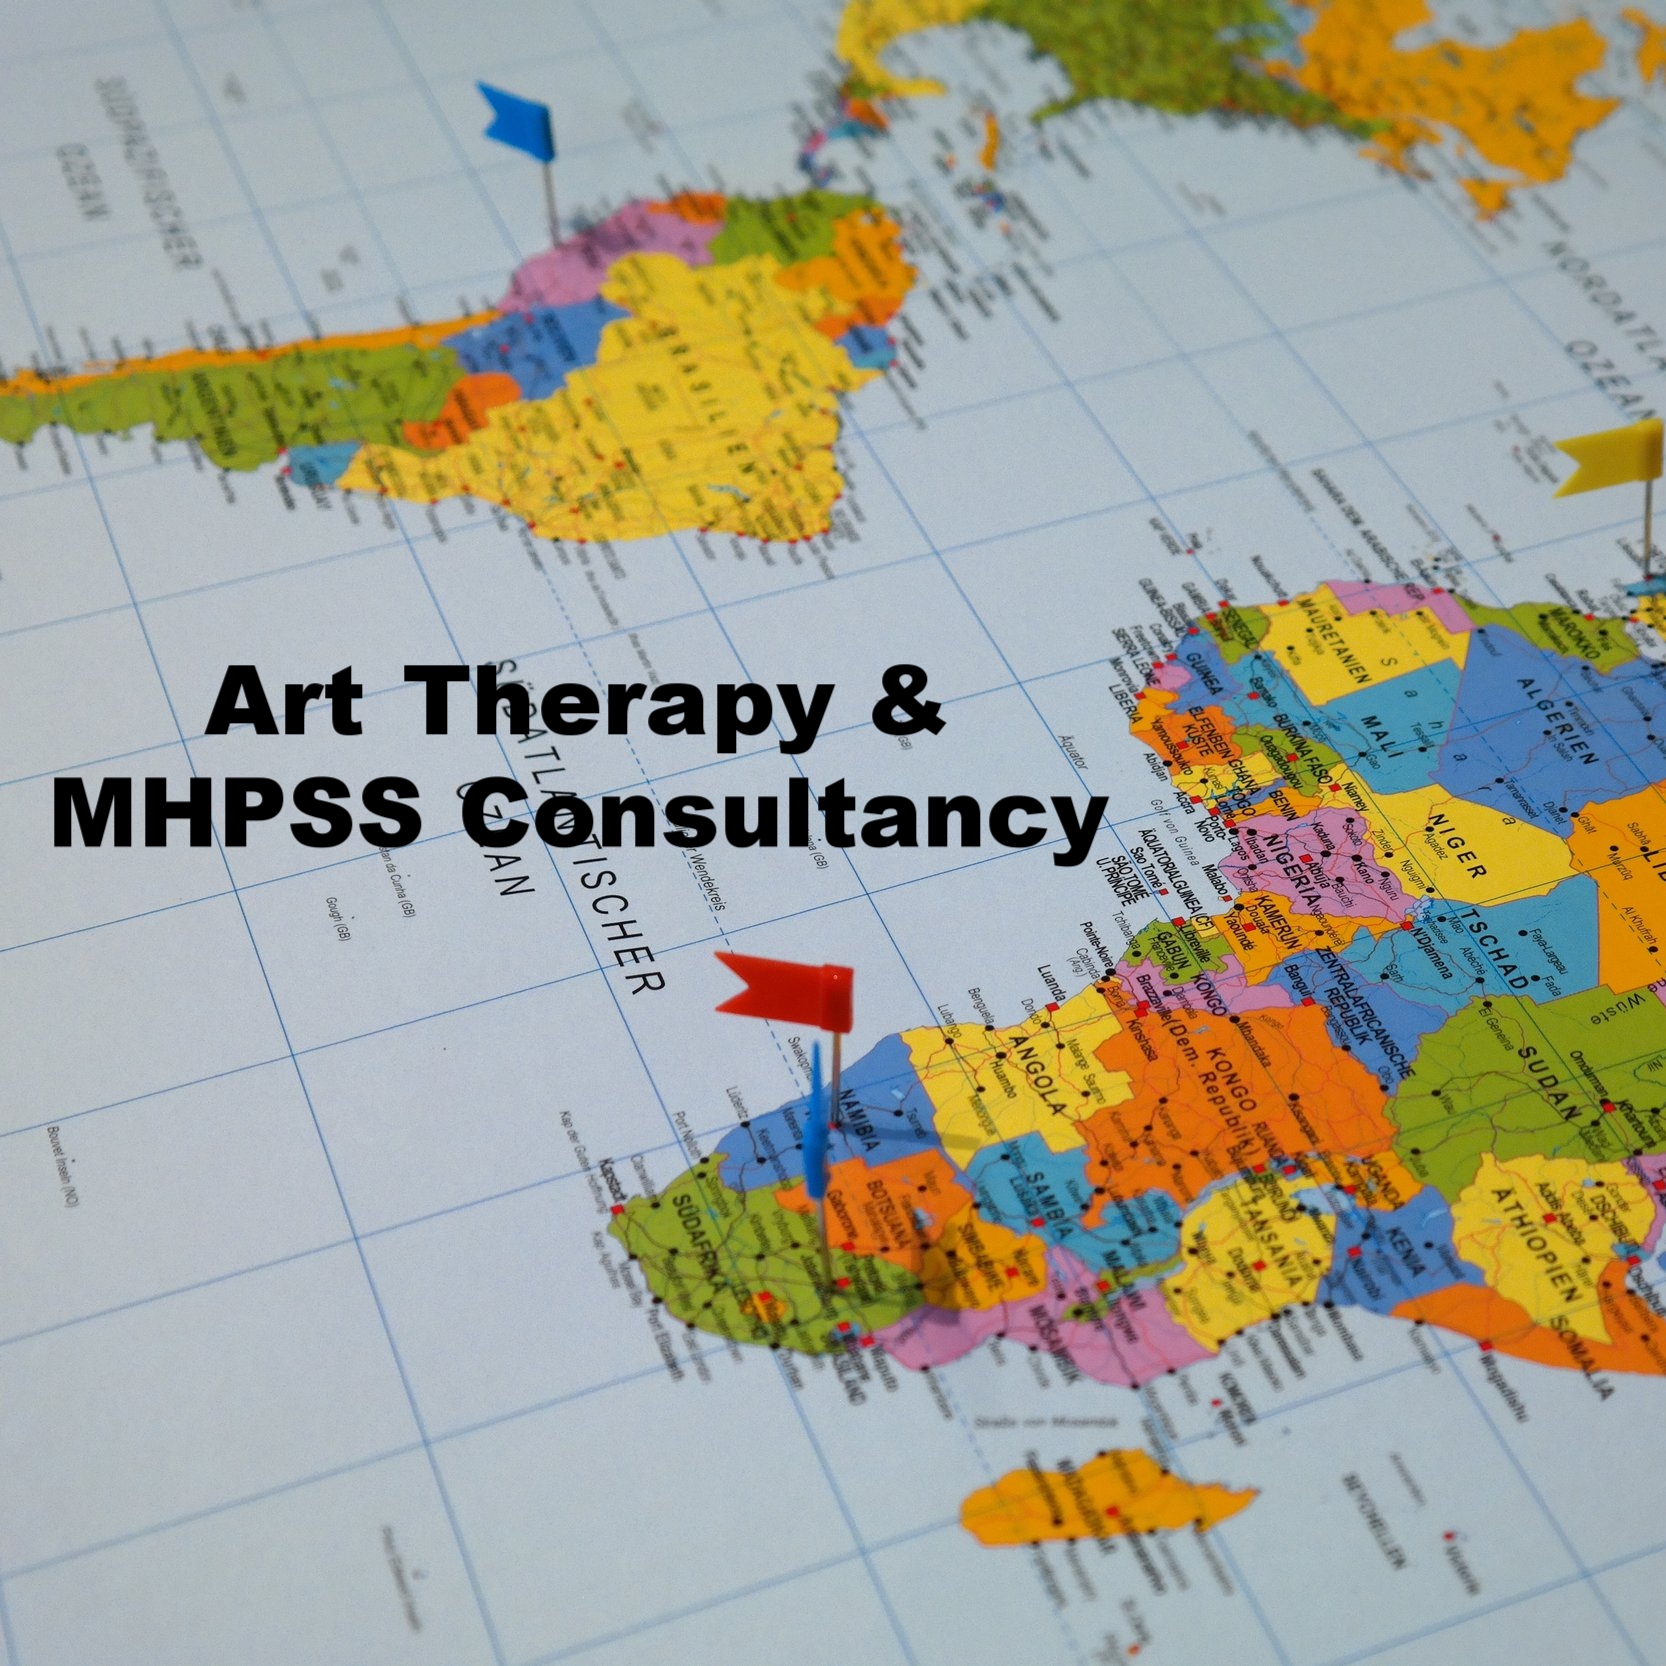 Art Therapy & MHPSS Consultancy